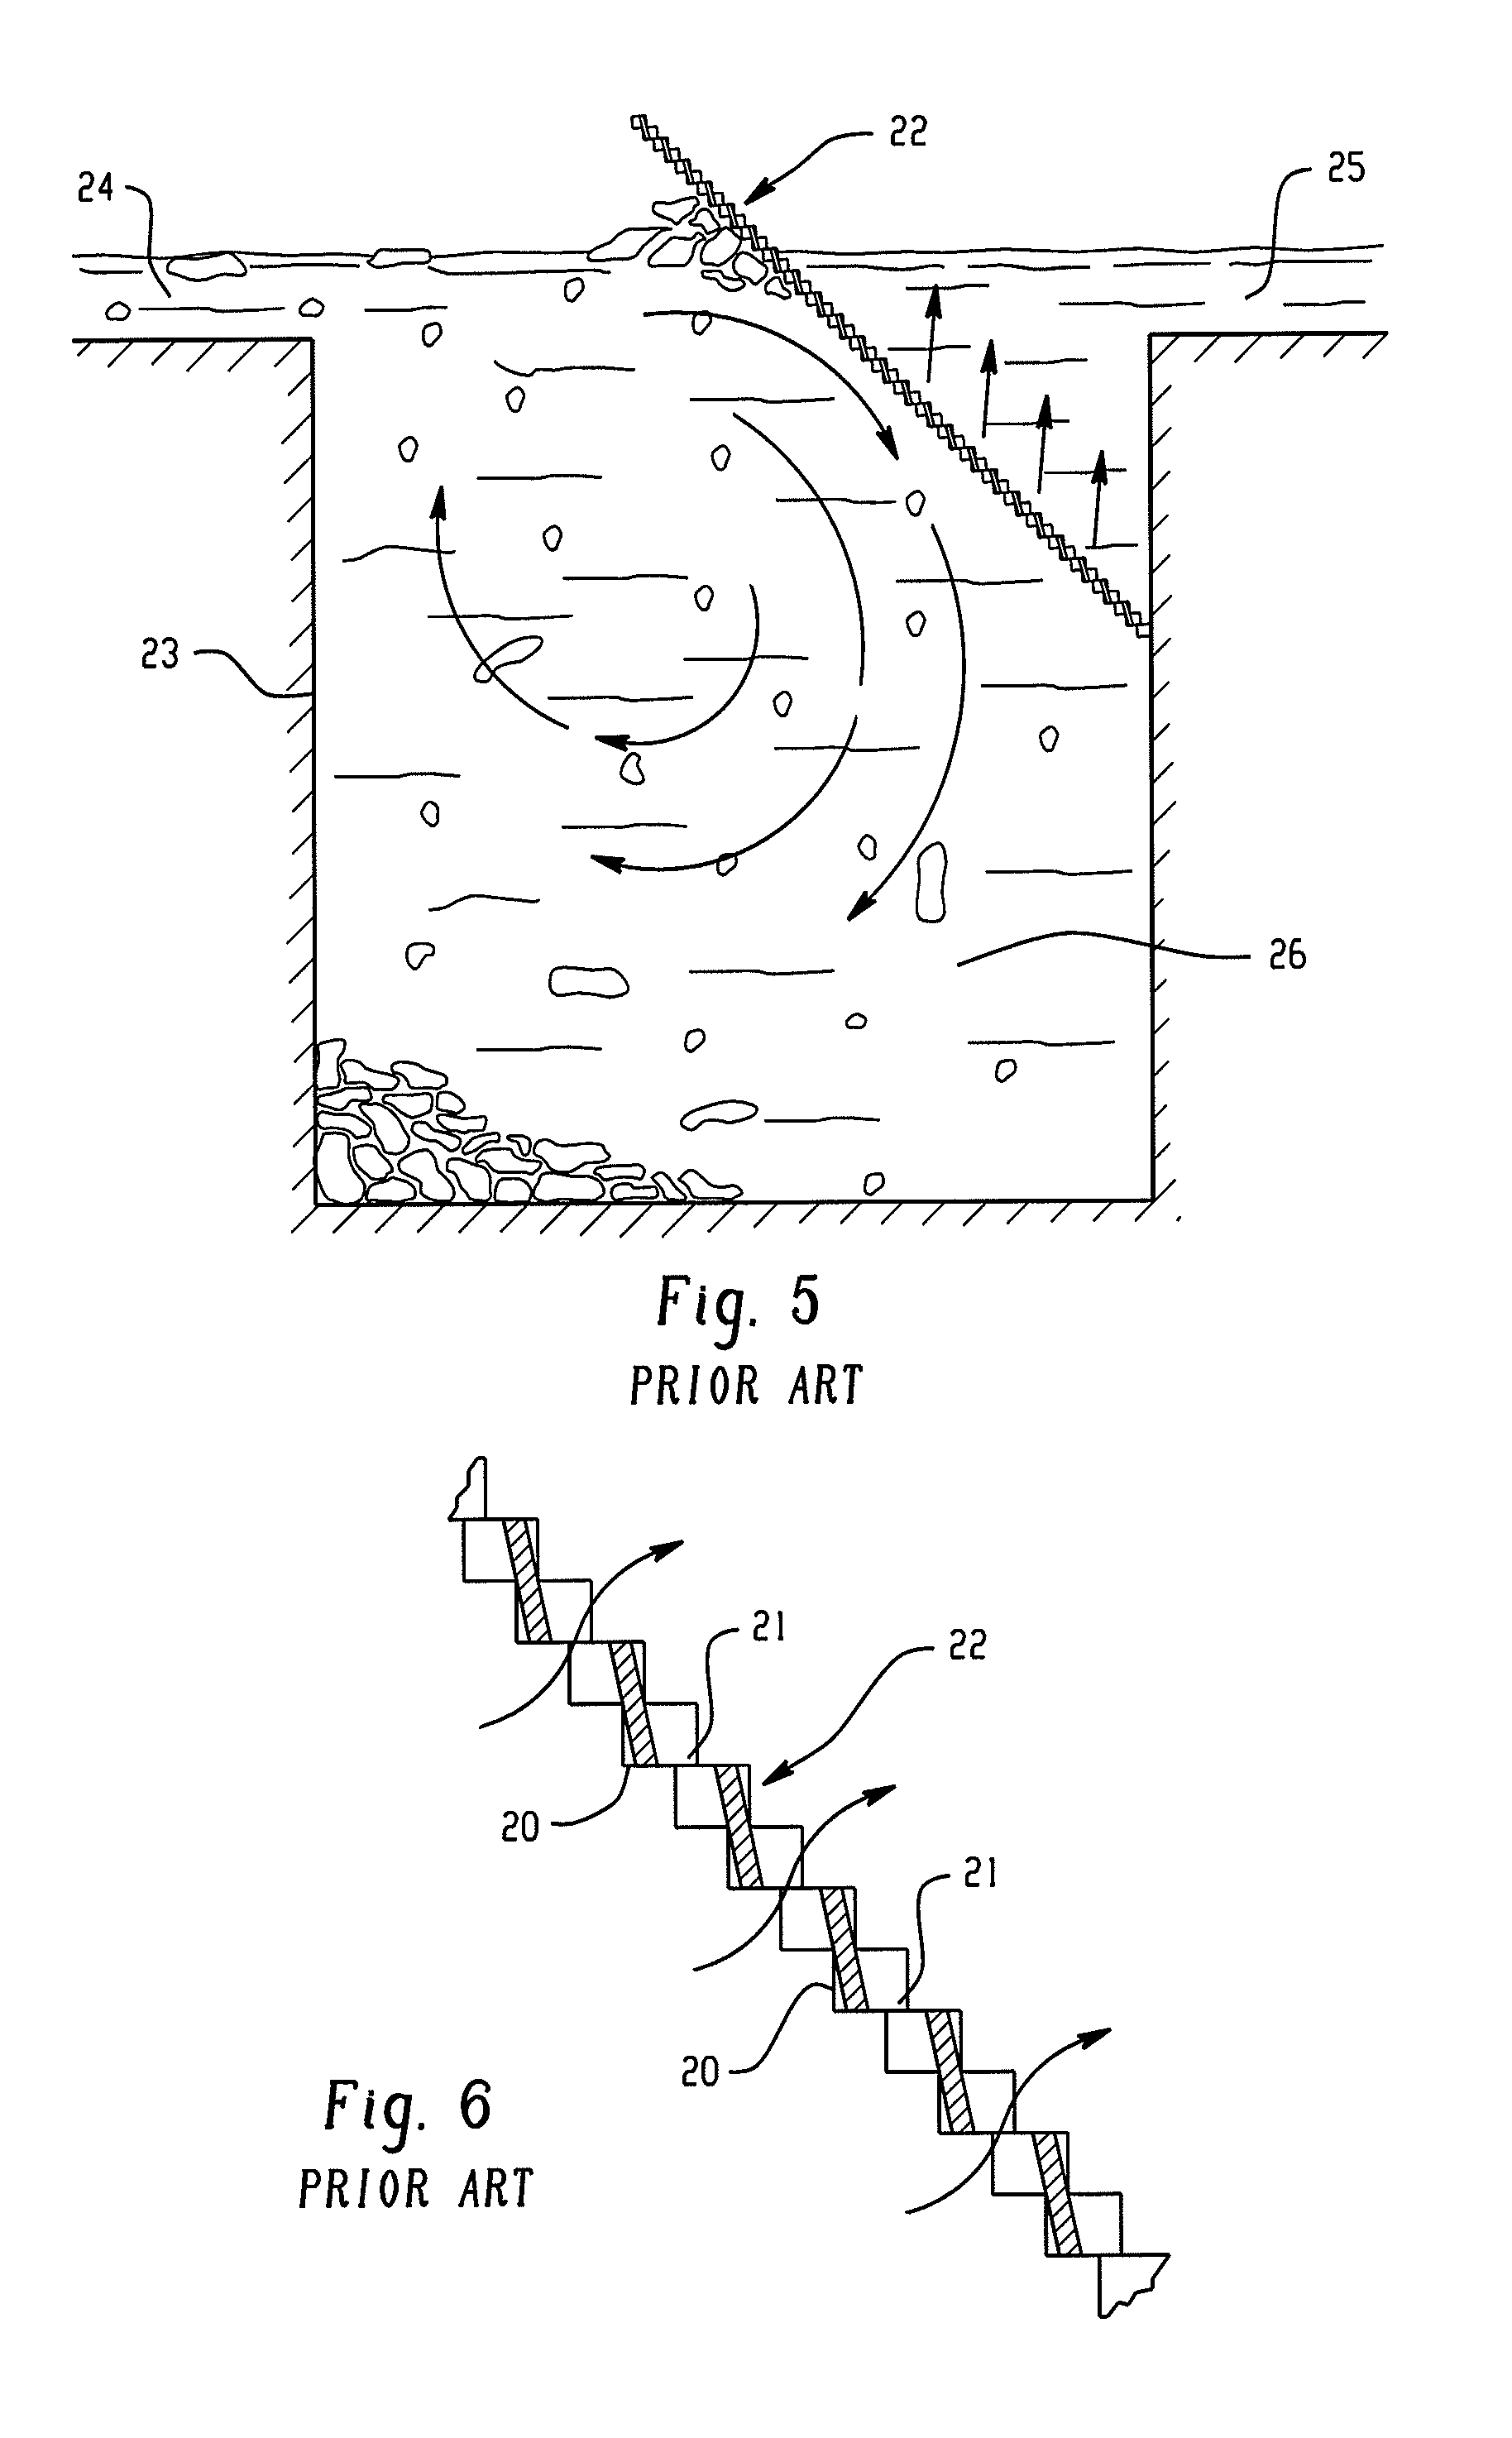 Apparatus for separating solids from flowing liquids